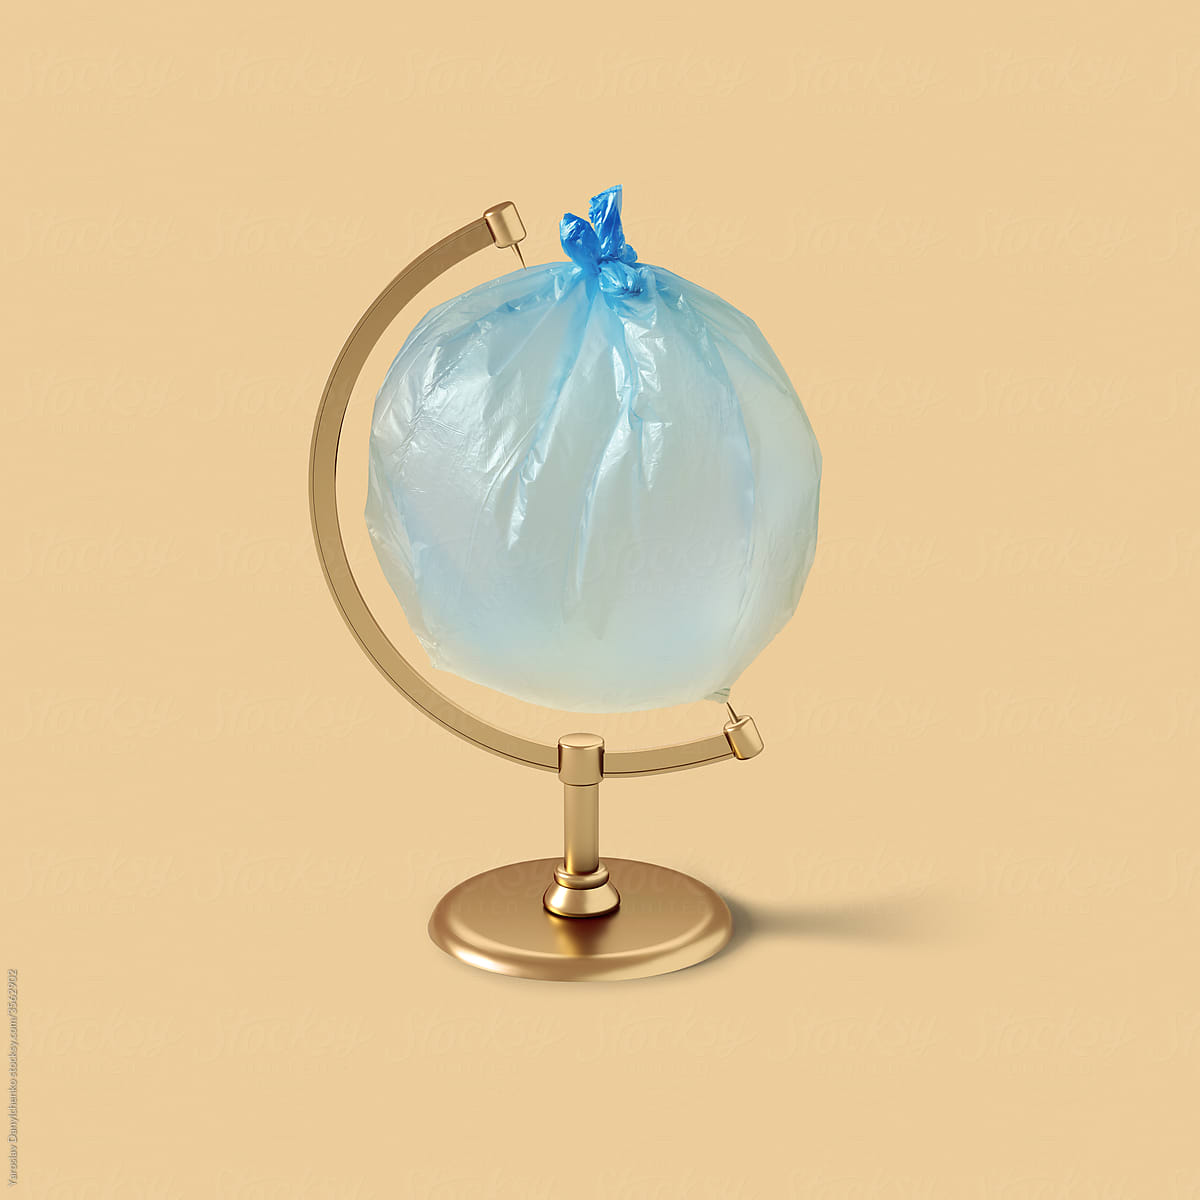 Globe made from an inflated plastic bag.